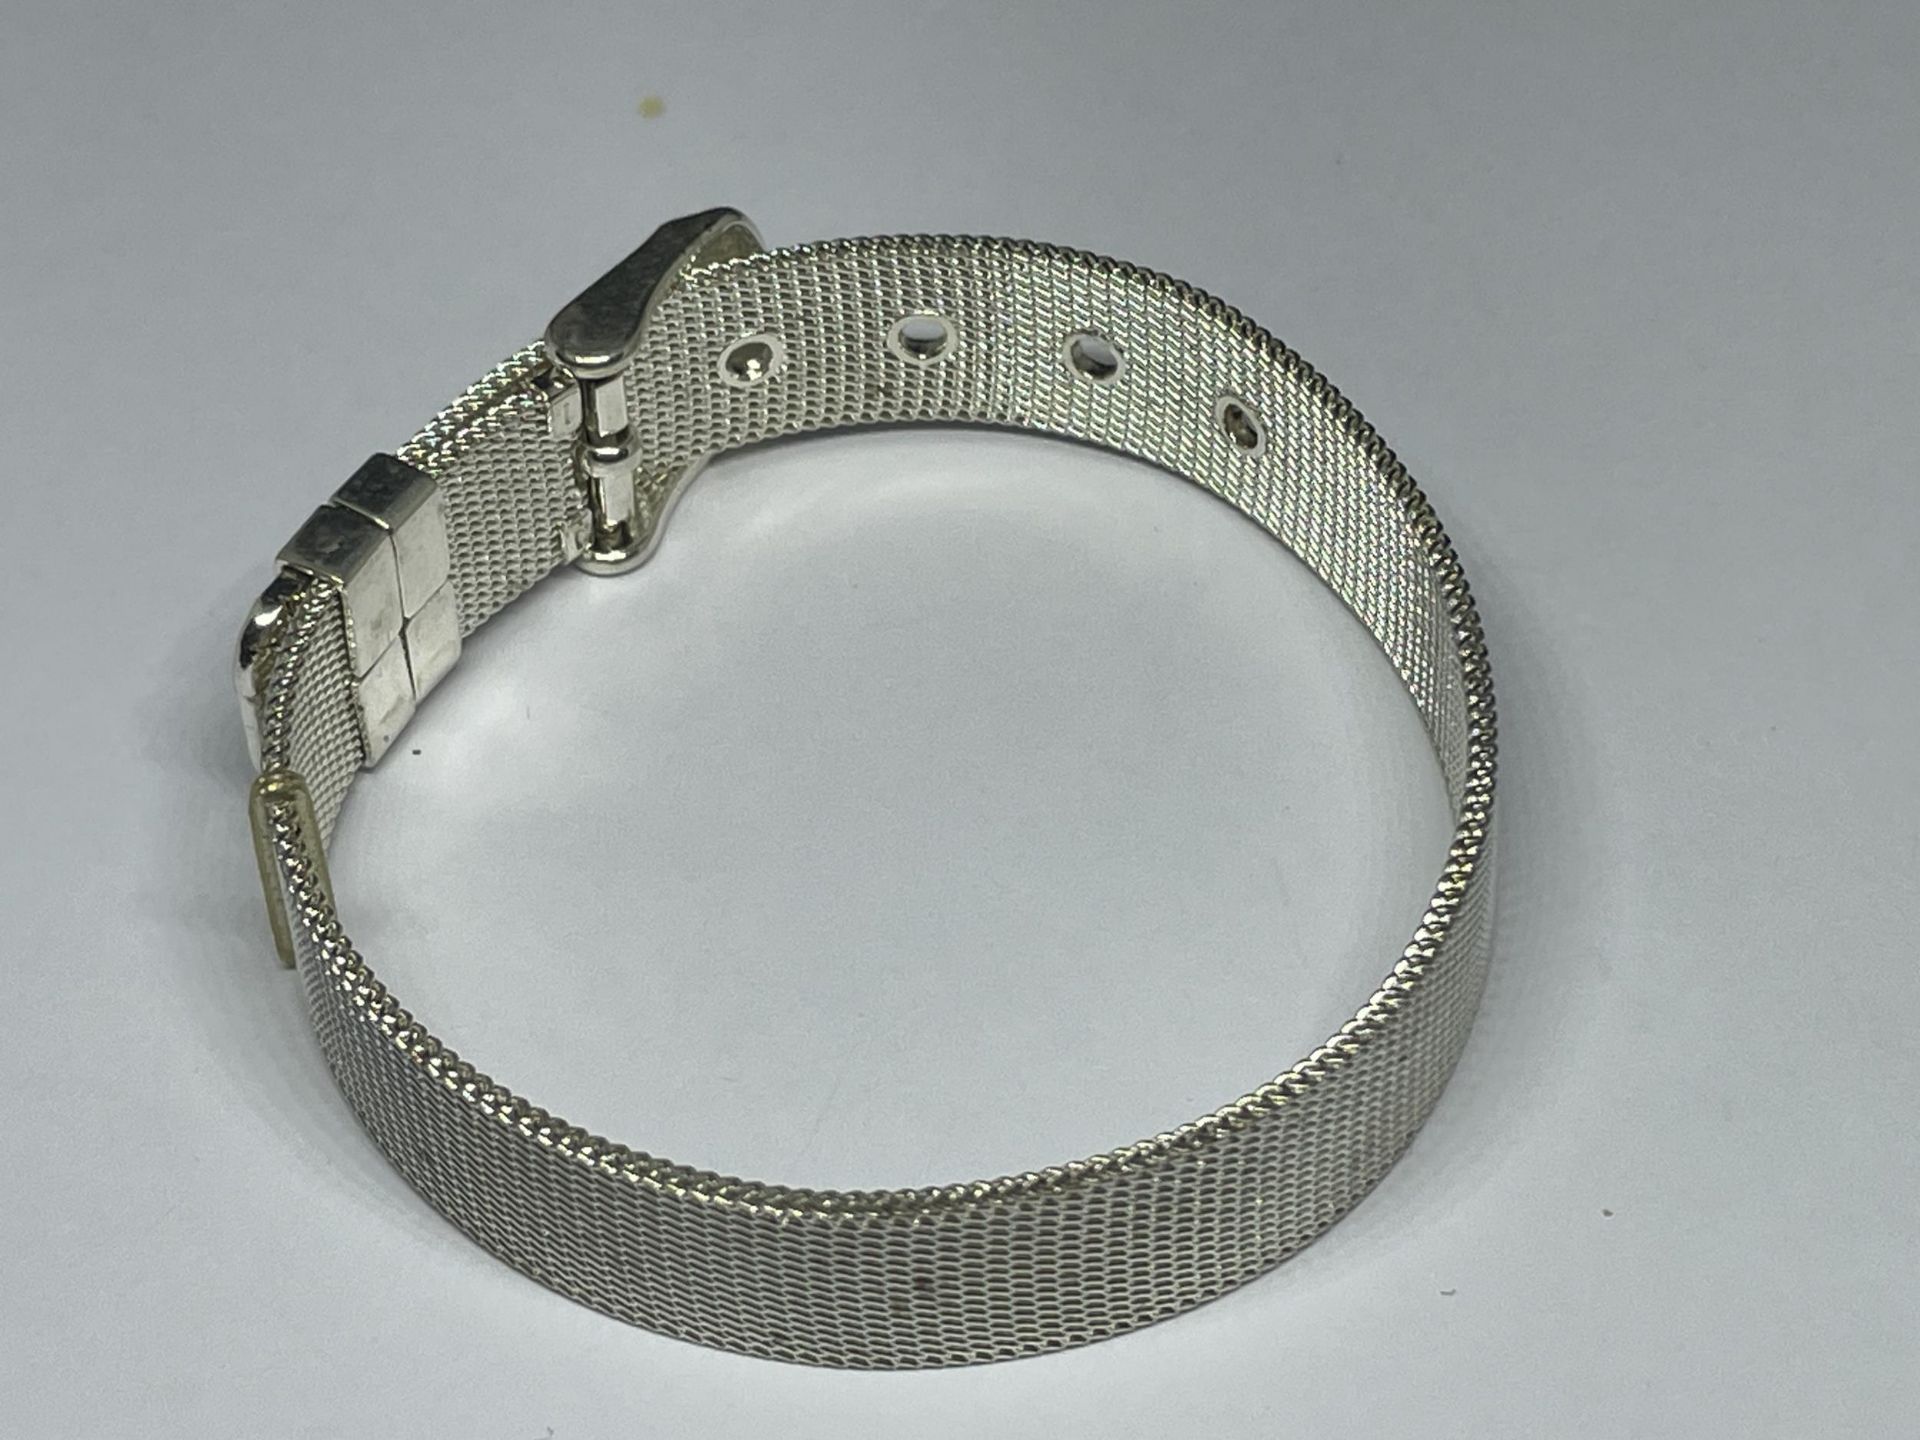 A MARKED 925 SILVER BRACLET IN THE FORM OF A BELT - Image 2 of 3